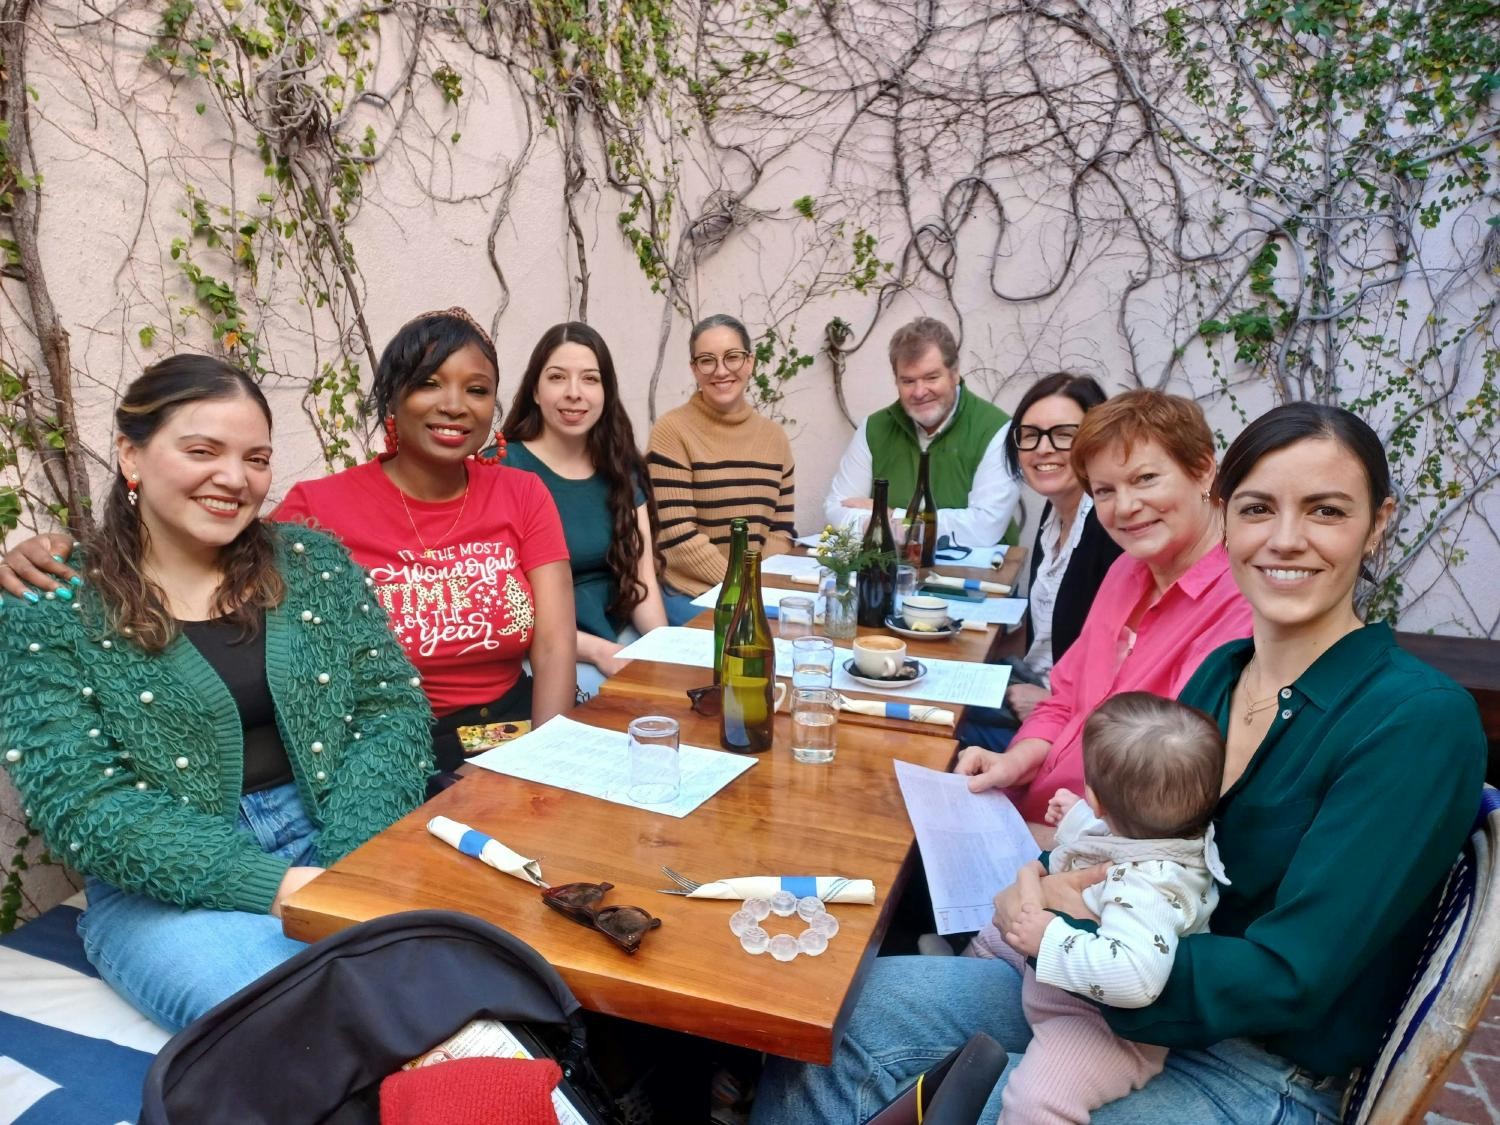 Our Santa Monica clinic team gathers for lunch to get to know each other better.